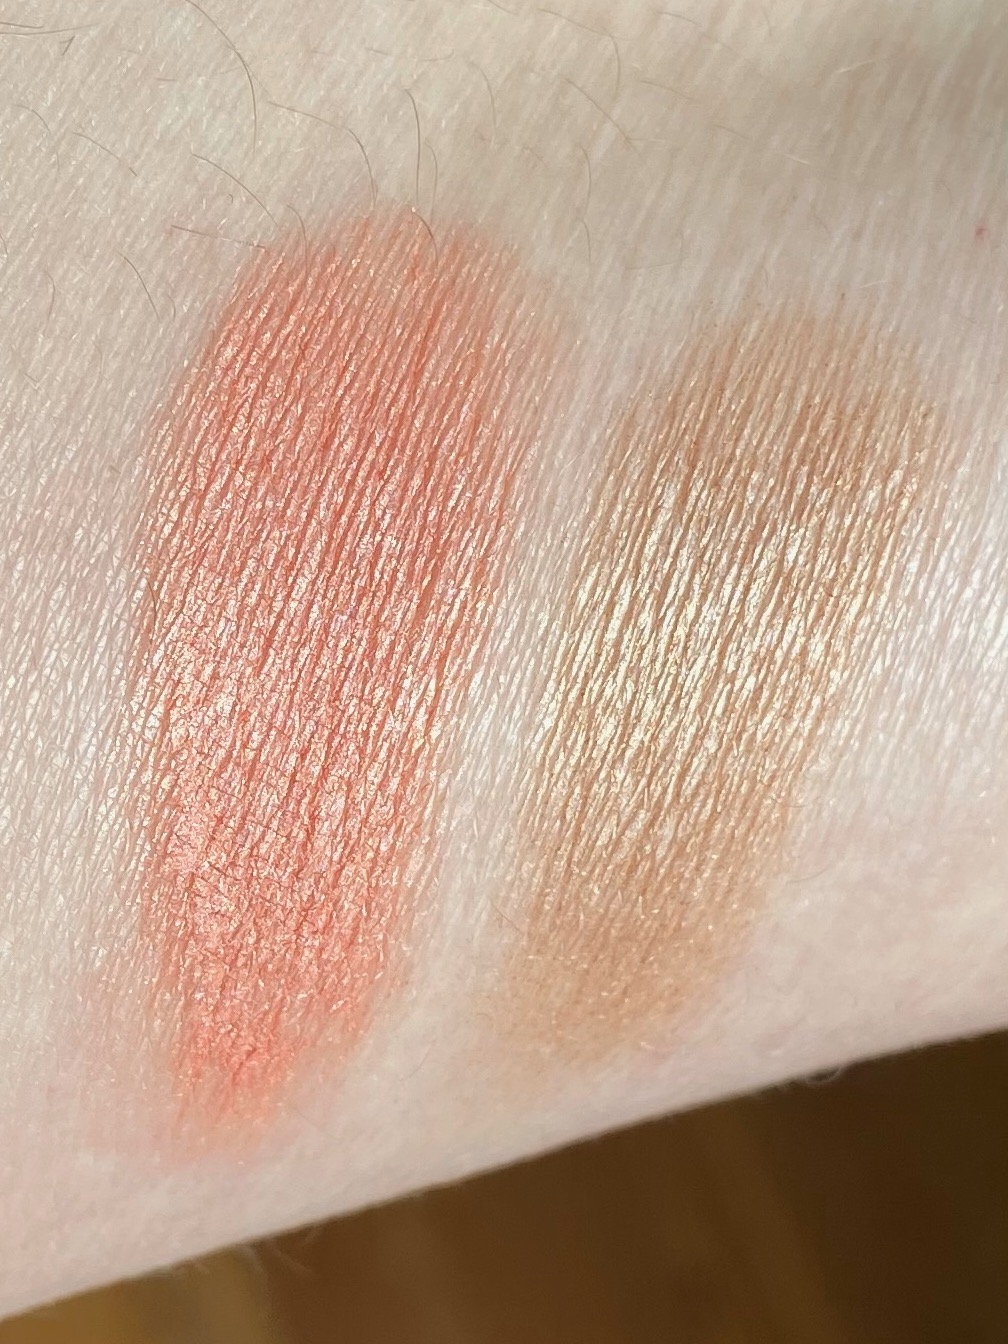 Clarins Ombre Satin 07 Glossy Brown 08 Glossy Coral Swatch